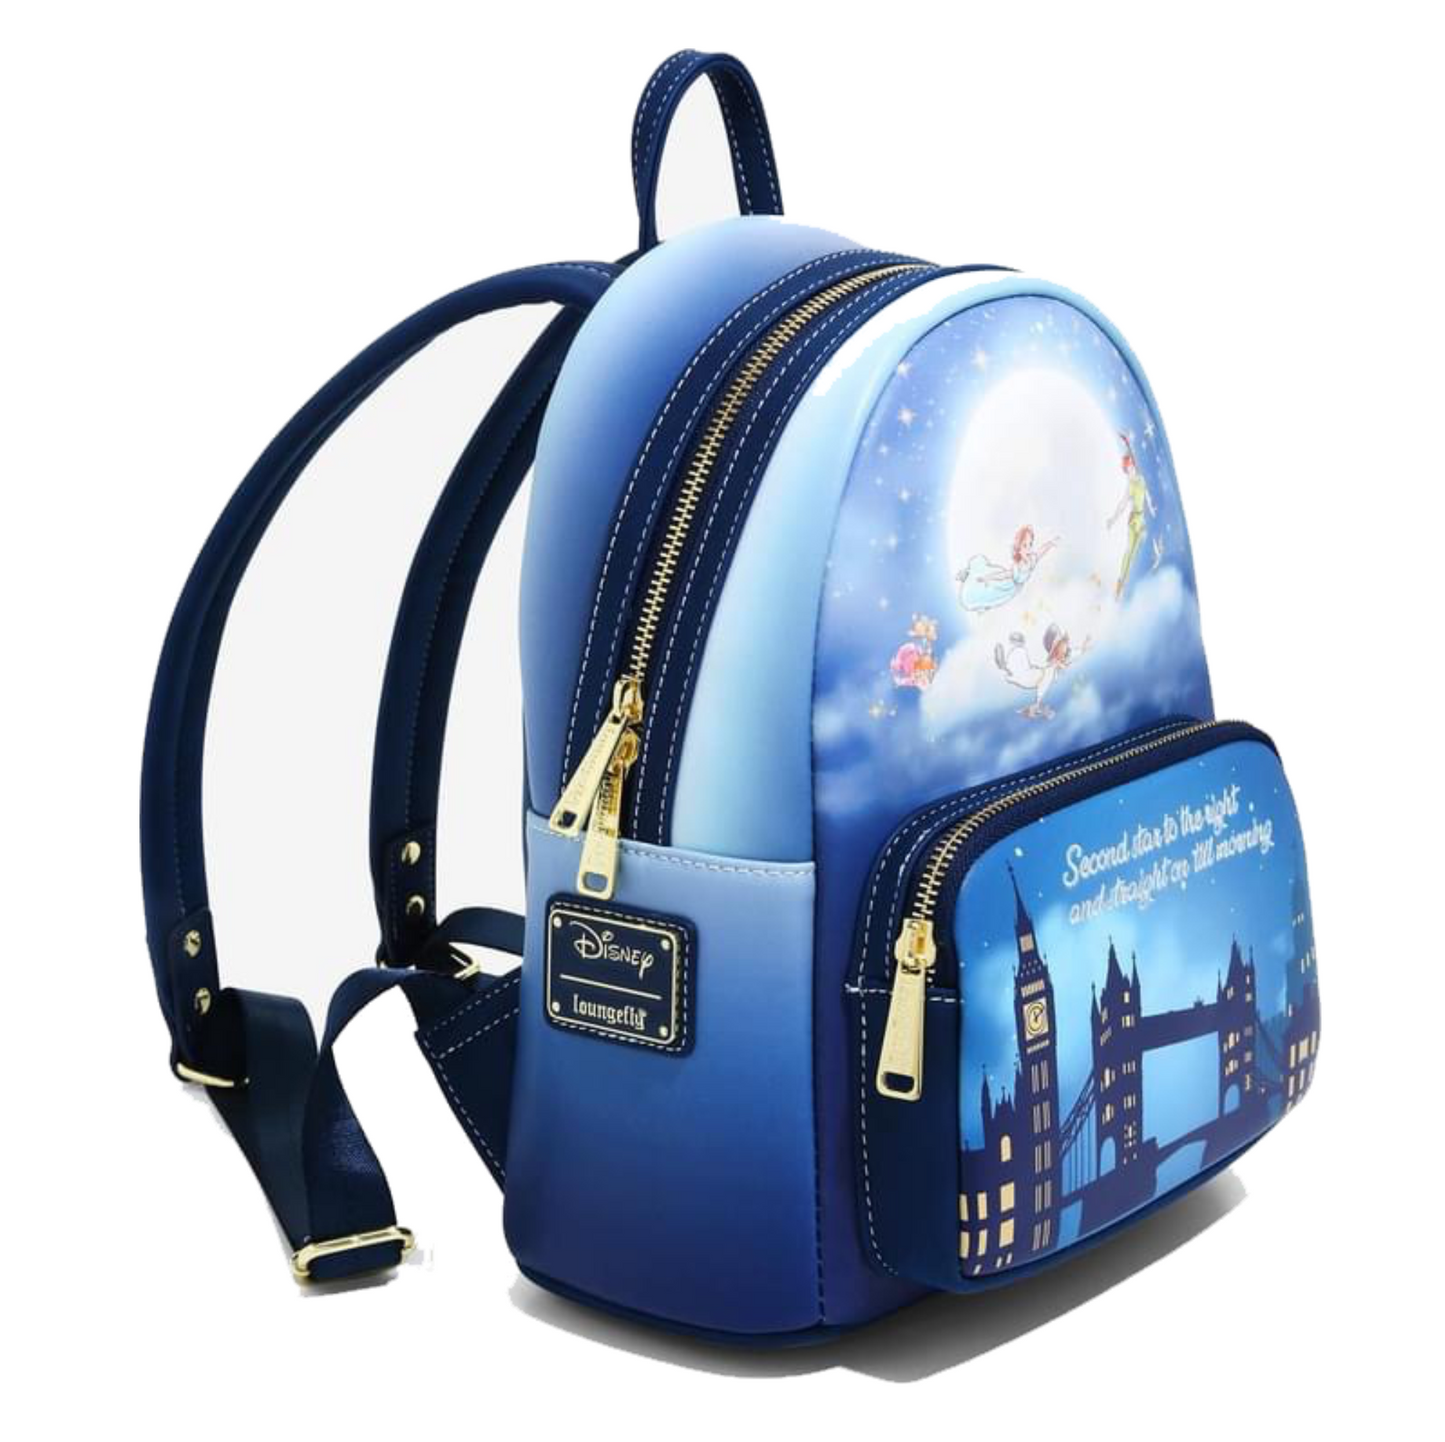 Loungefly X Disney Peter Pan Second Star Glow Mini Backpack